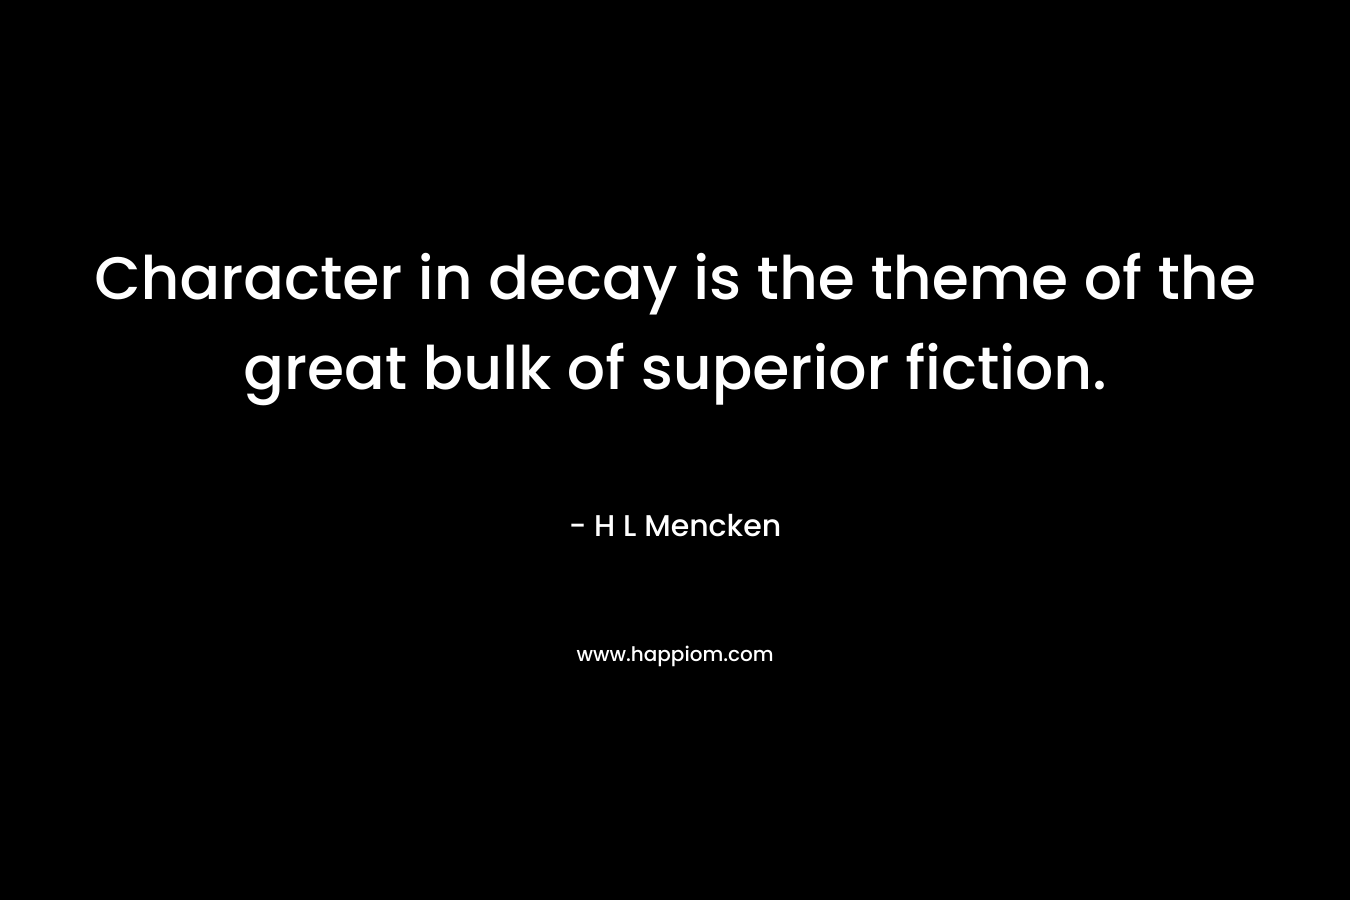 Character in decay is the theme of the great bulk of superior fiction. – H L Mencken